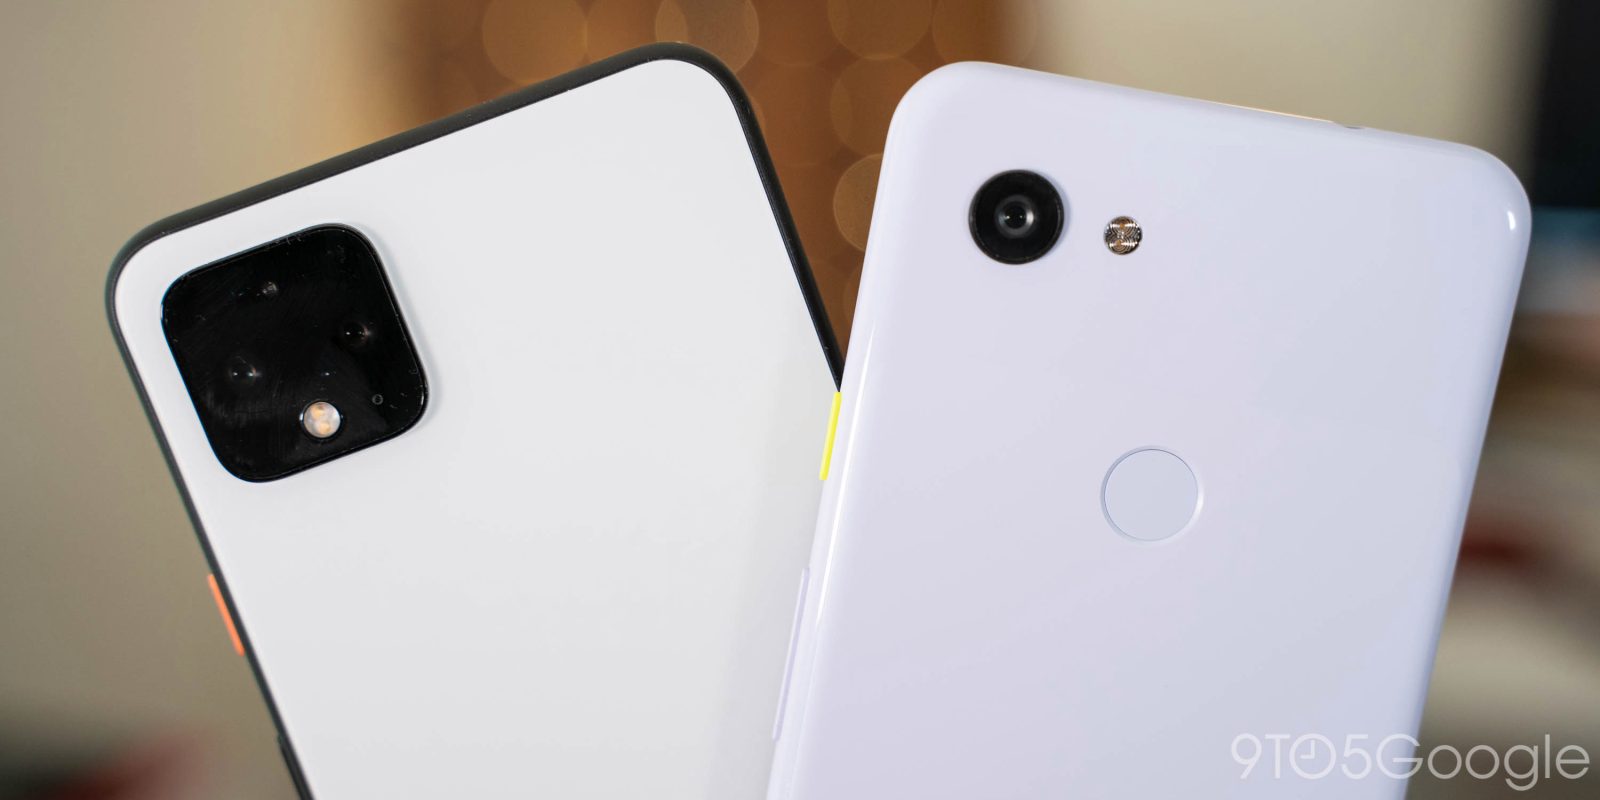 Google Pixel 4a: latest interesting features, price, specifications and